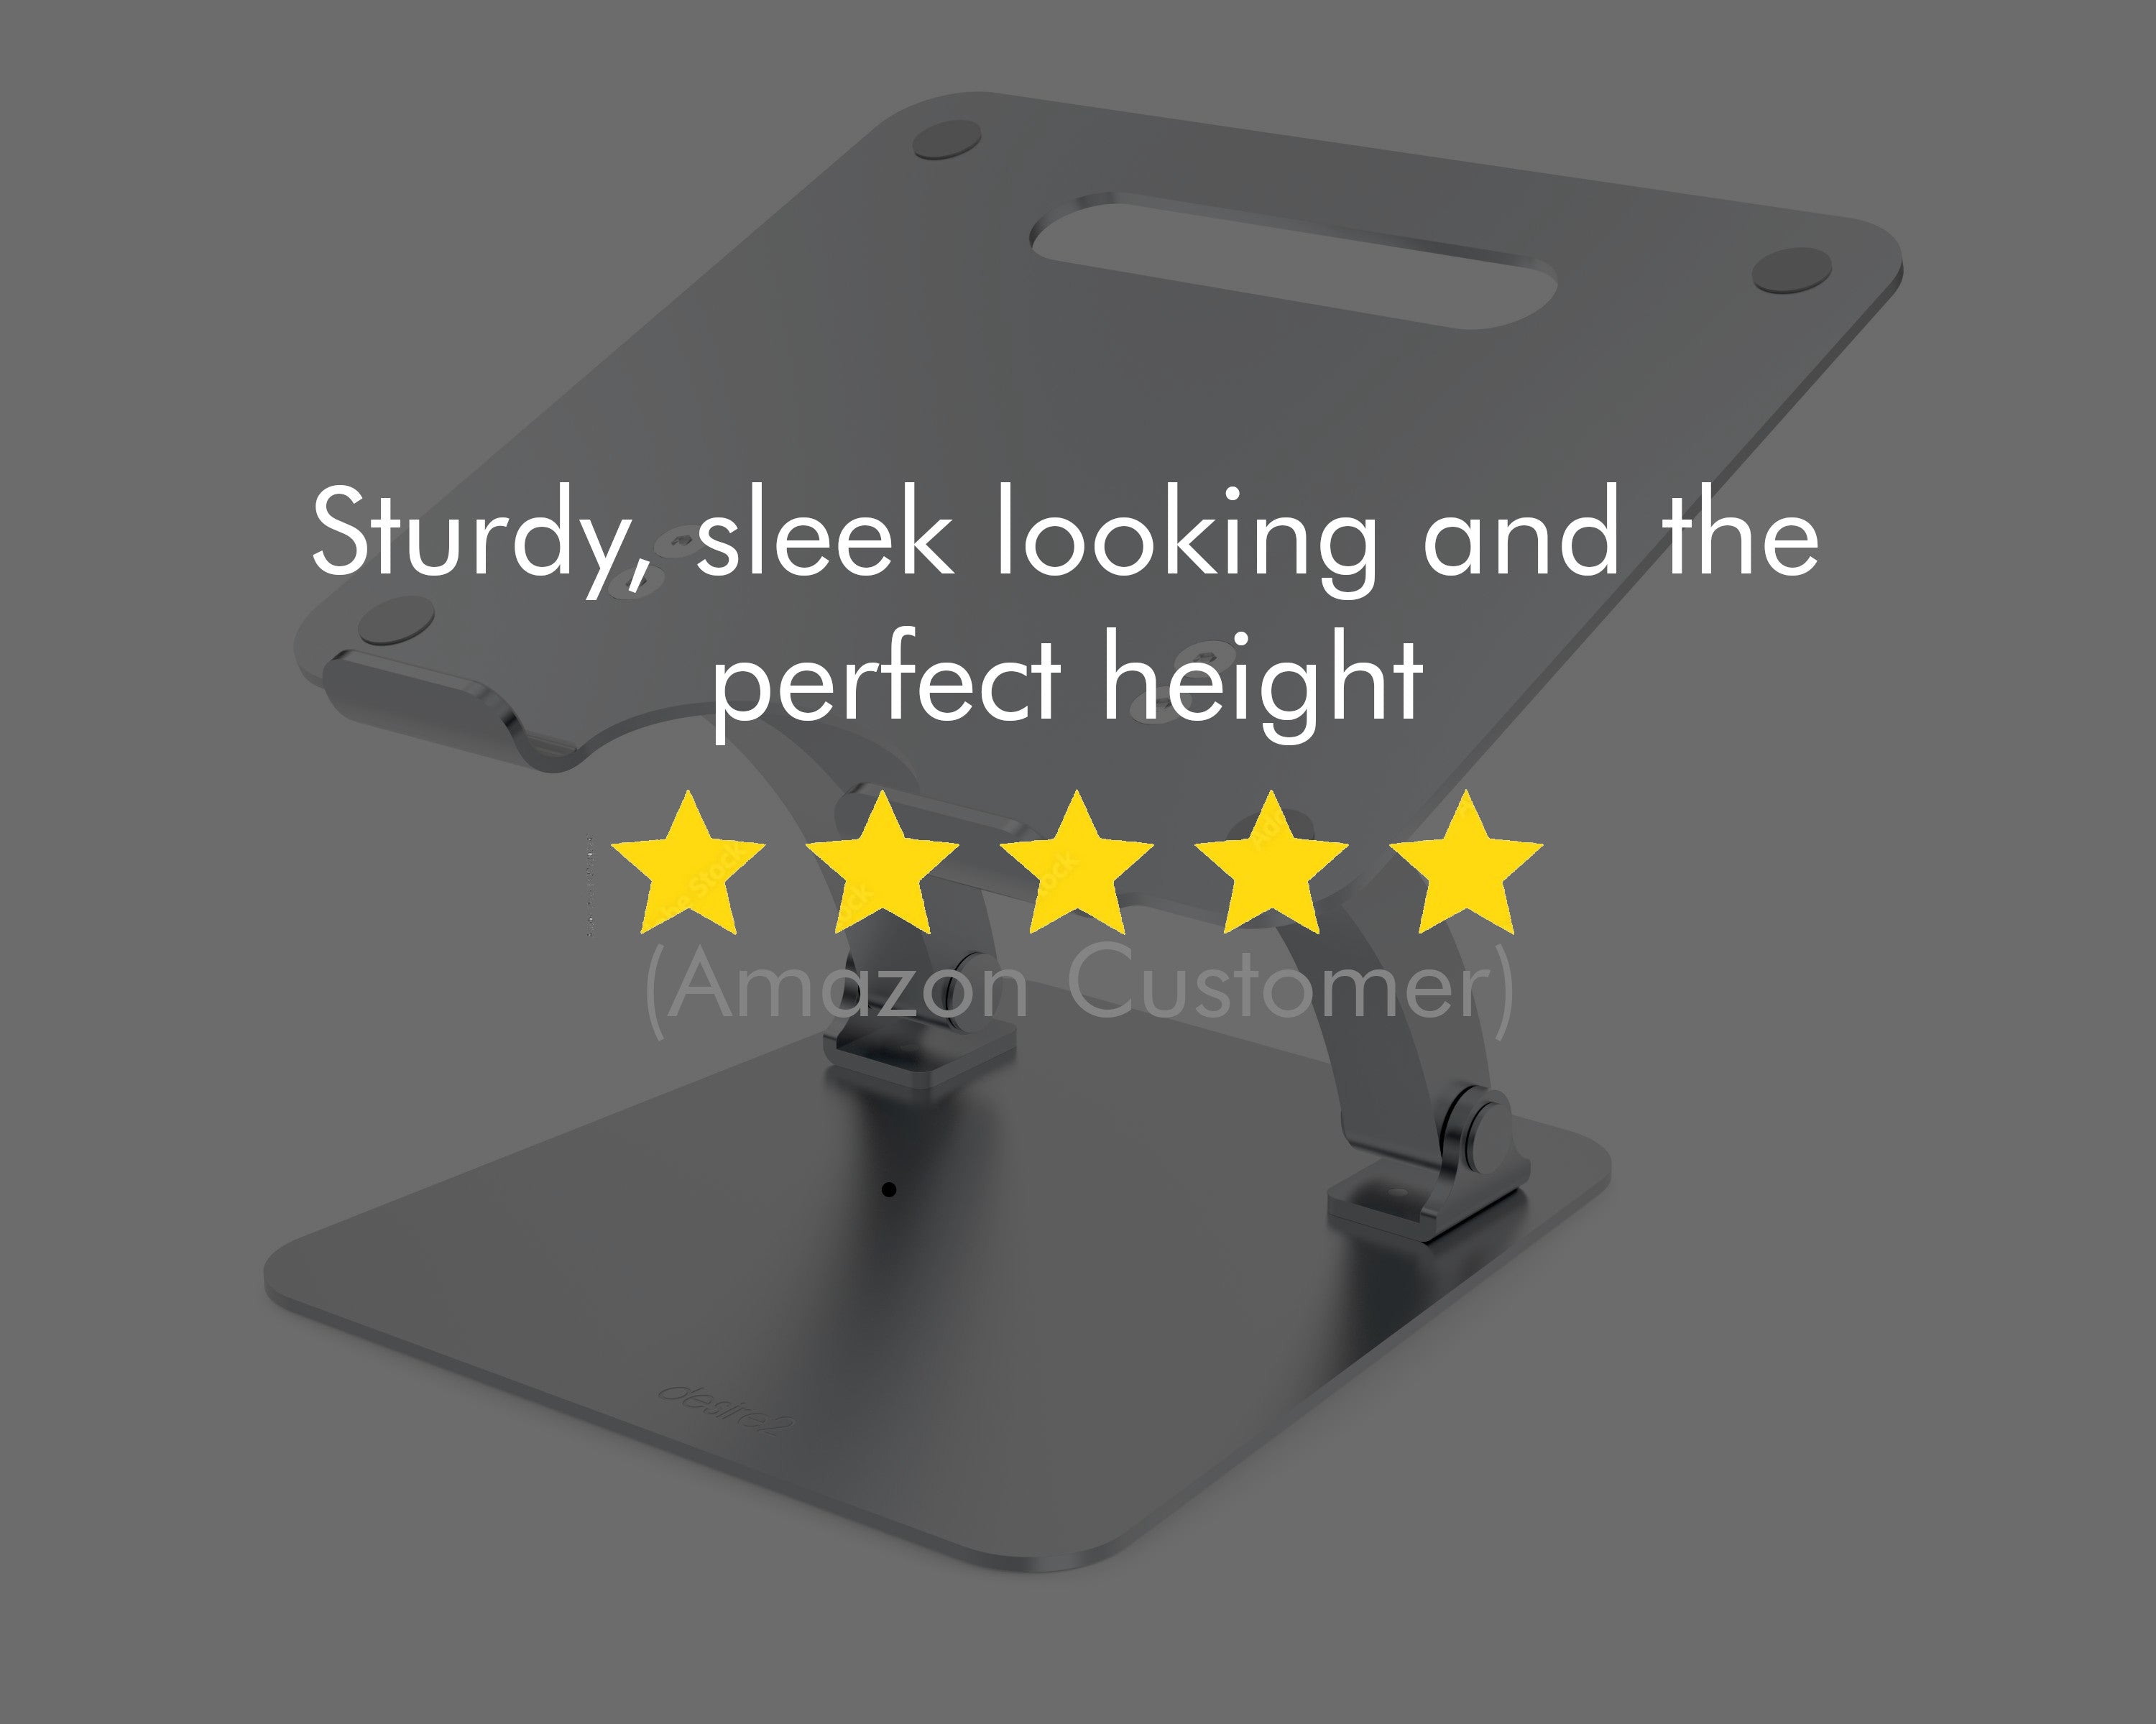 A picture of a laptop stand in the open position with text overlaid which shows five stars and the words "sturdy, sleek looking and the perfect height"  